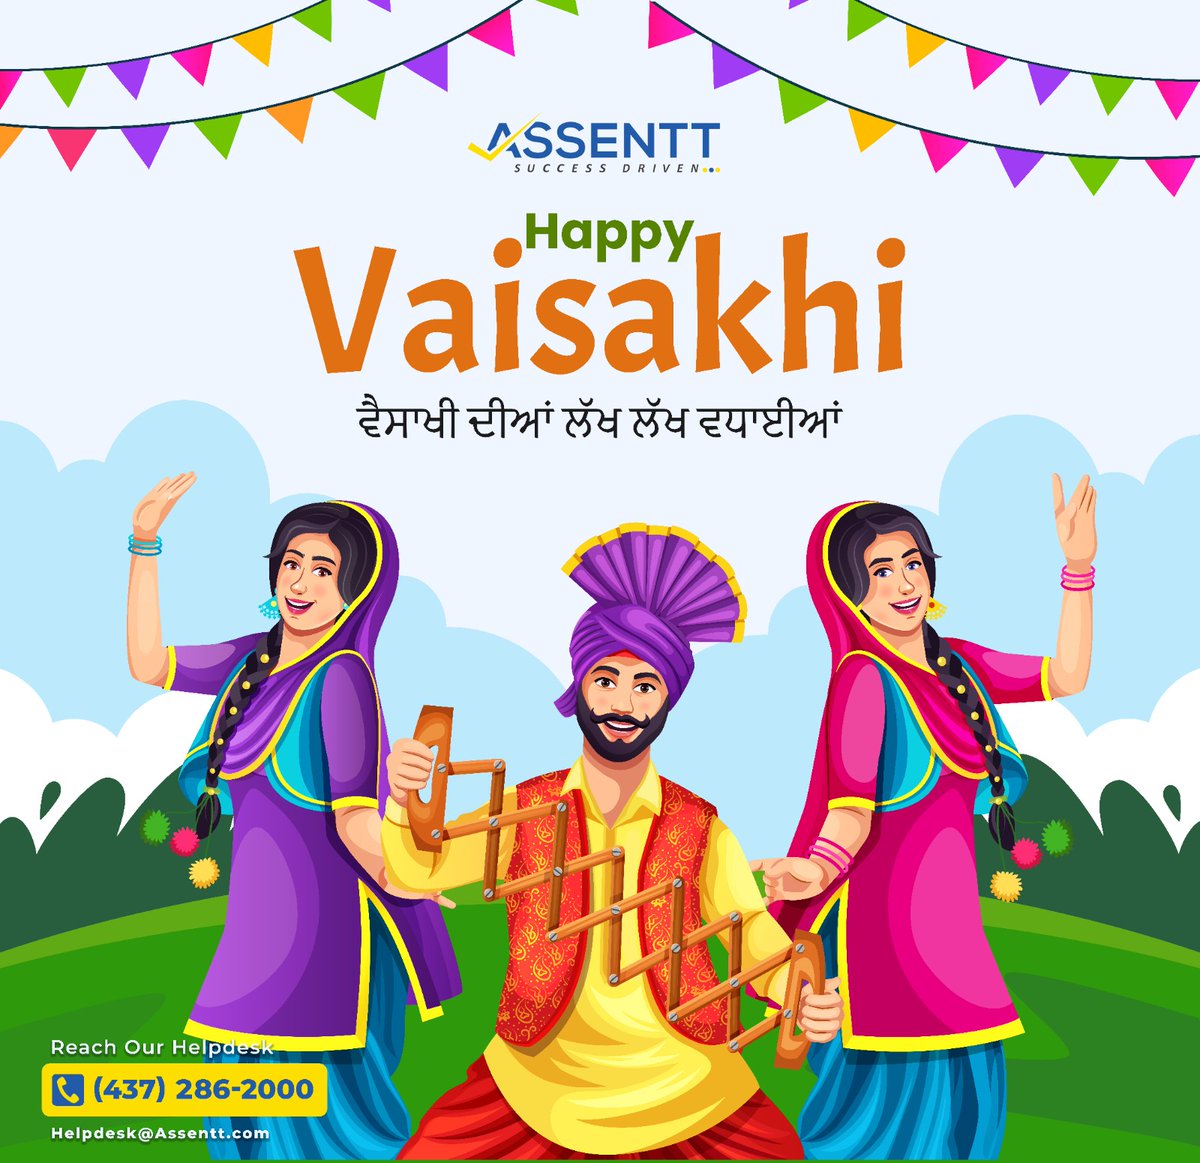 May Waheguru bless you with health, growth, and peace on this festival of harvest. Celebrate Baisakhi with love and happiness! Happy Baisakhi 🌾 #baisakhifestival #baisakhi2024 #BALBIRSINGHSAINI #ASSENTT #BOB #festival #punjab #wishes #CANADA #farmers #india